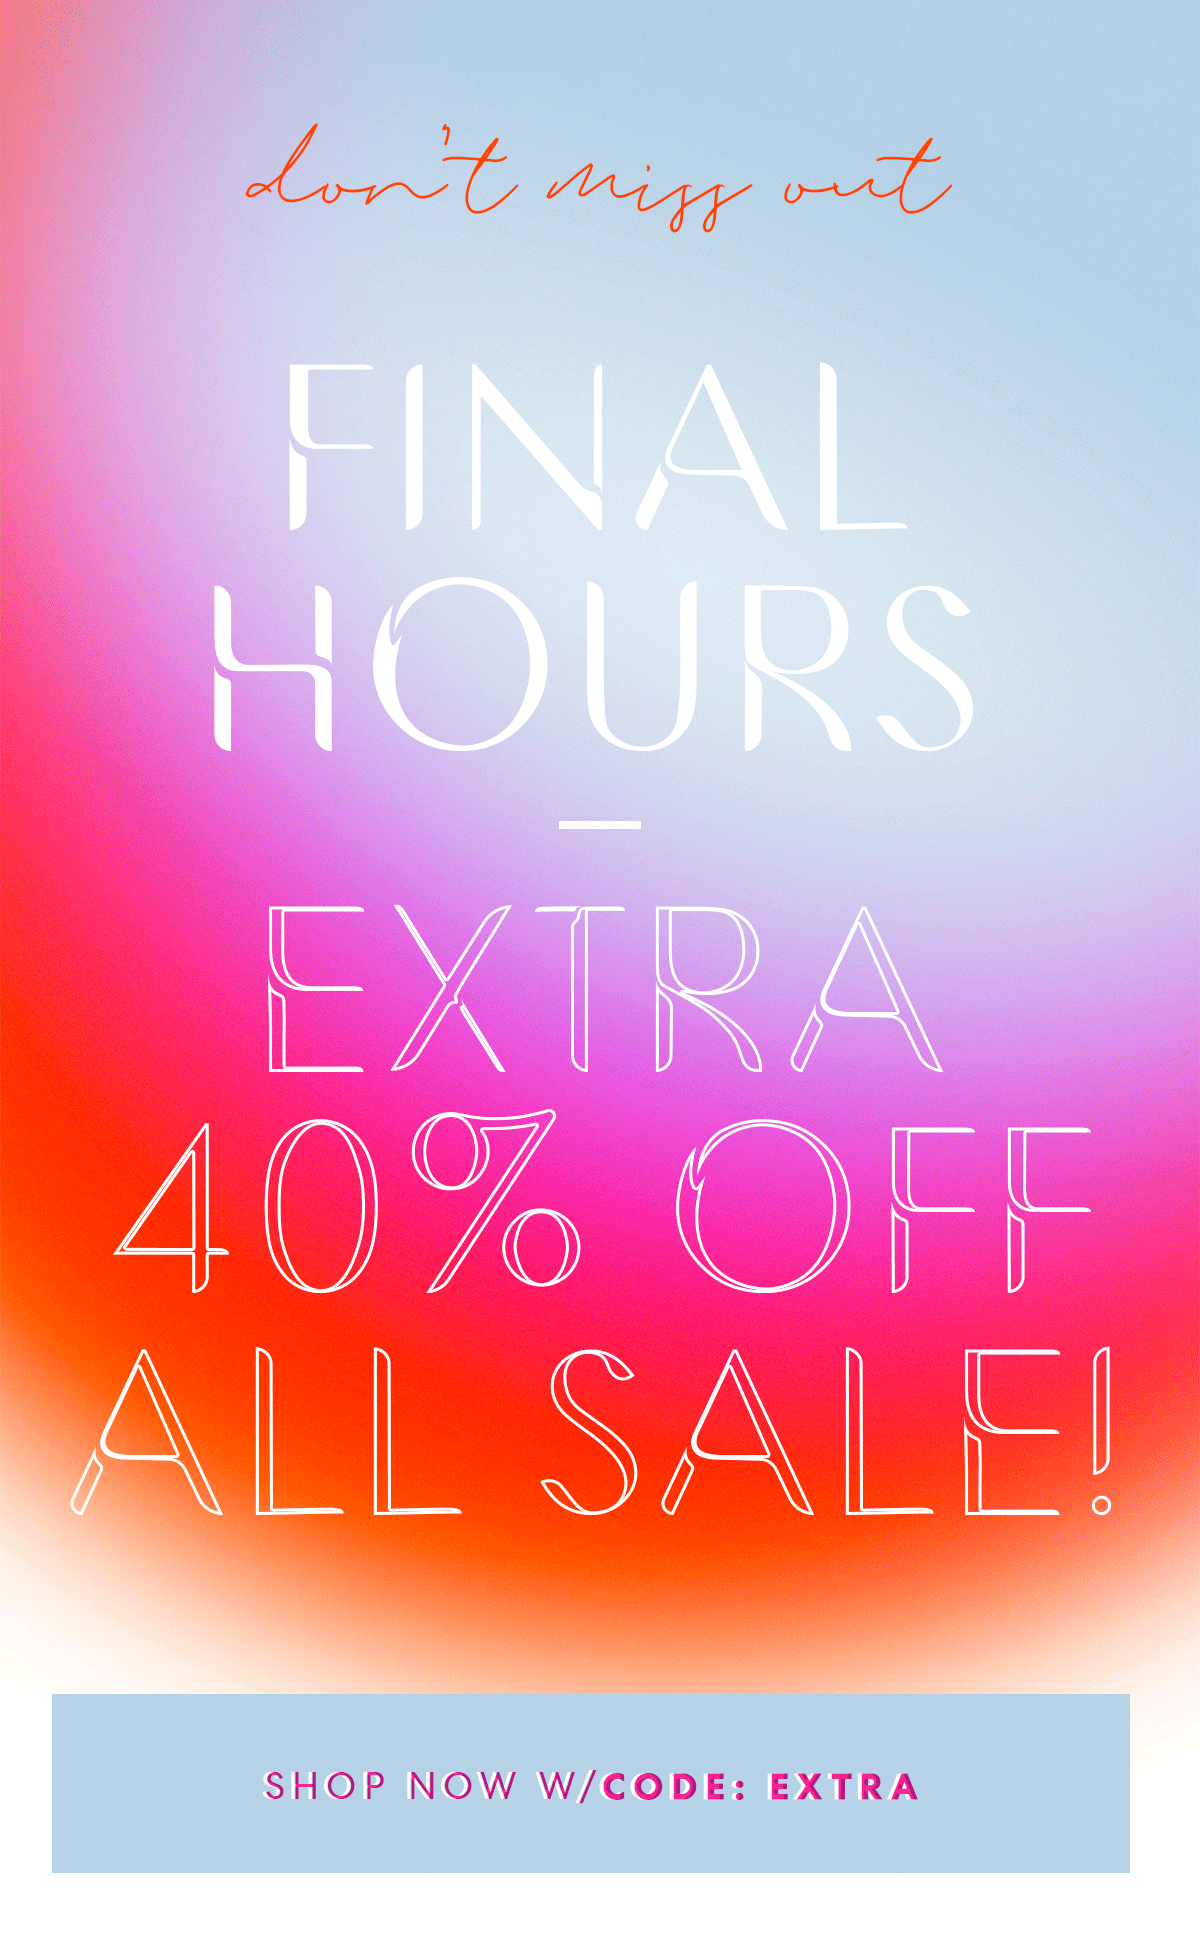 don't miss out! FINAL HOURS - EXTRA 40% OFF ALL SALE! SHOP NOW W/CODE: EXTRA